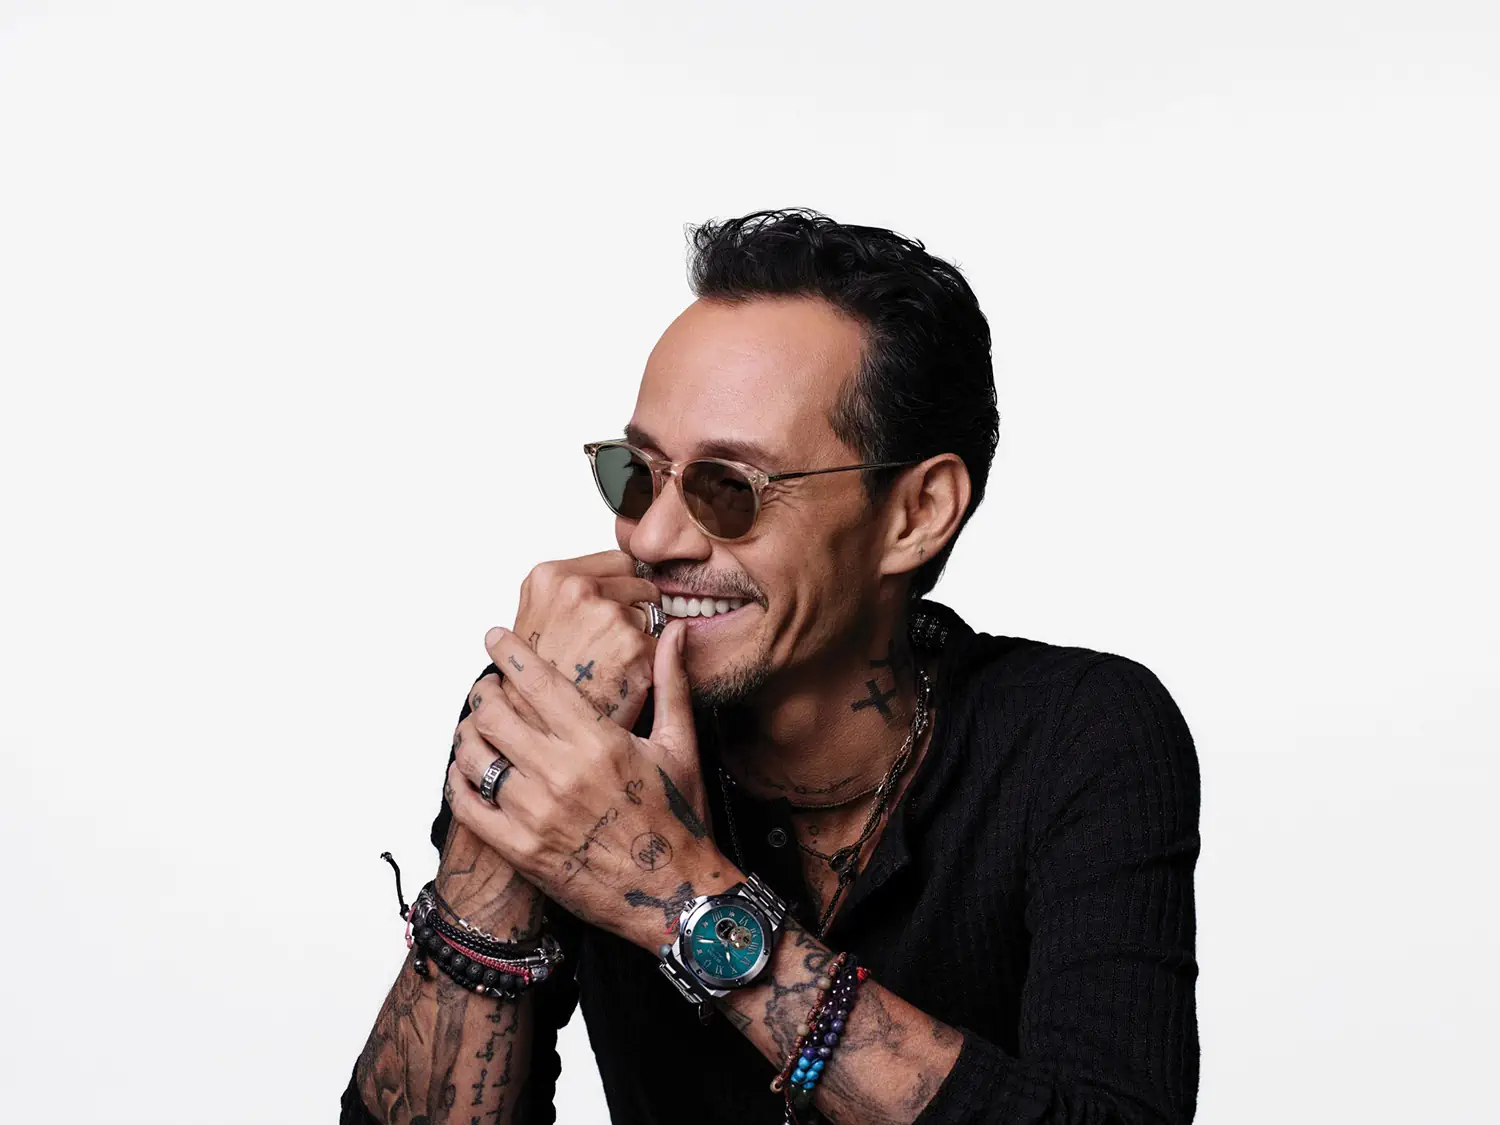 Marc Anthony joins Bulova in artful exclusive partnership